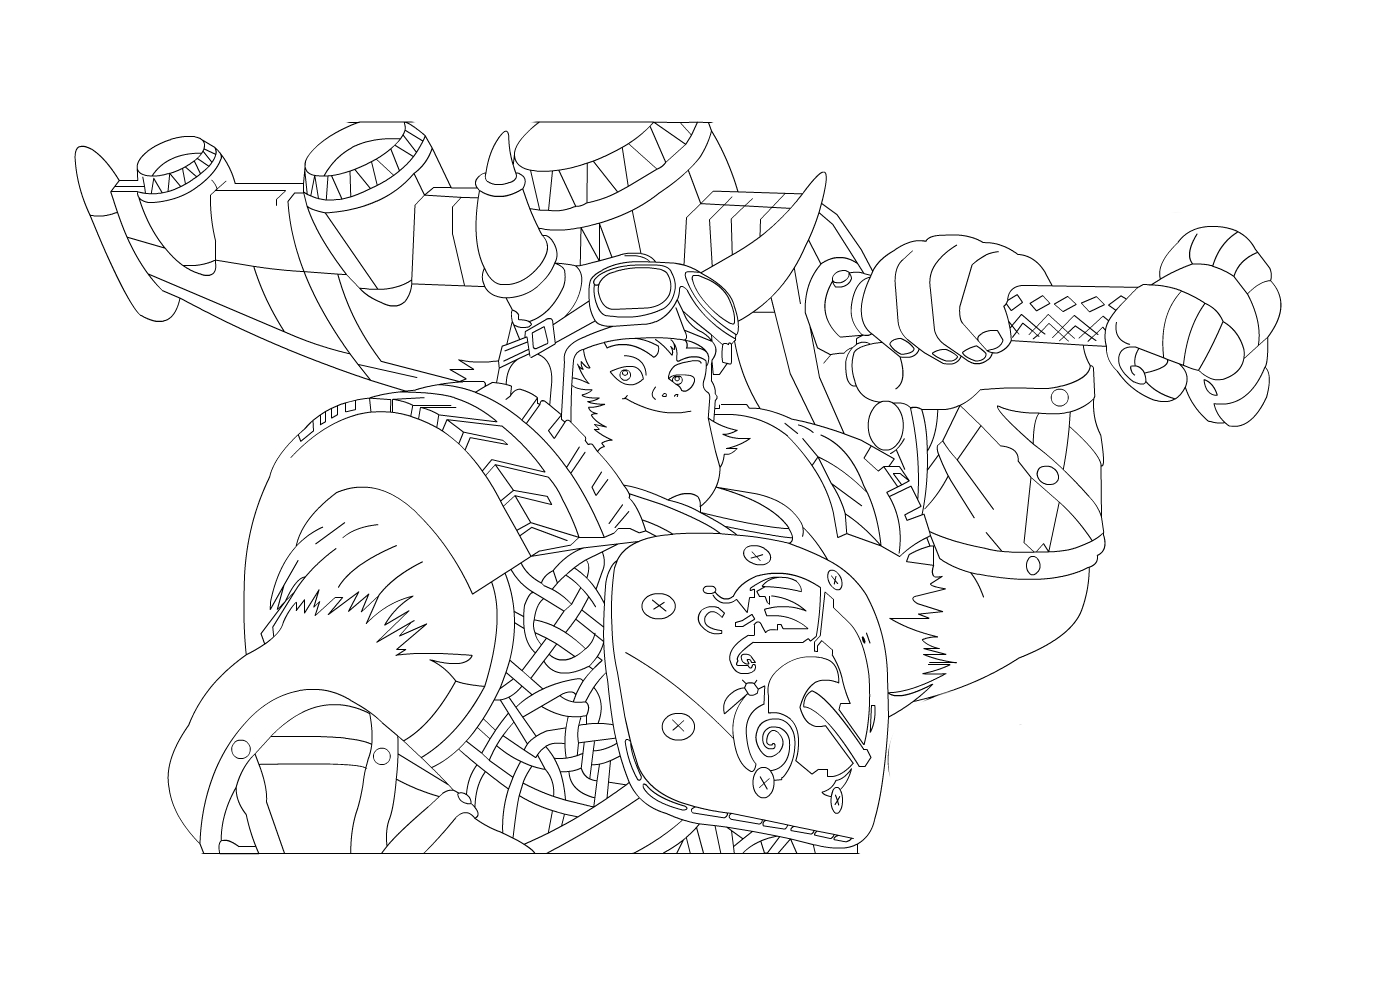 Zak Storm Coloring Pages To Download And Print For Free tout Coloriage Zak Storm Calabrass